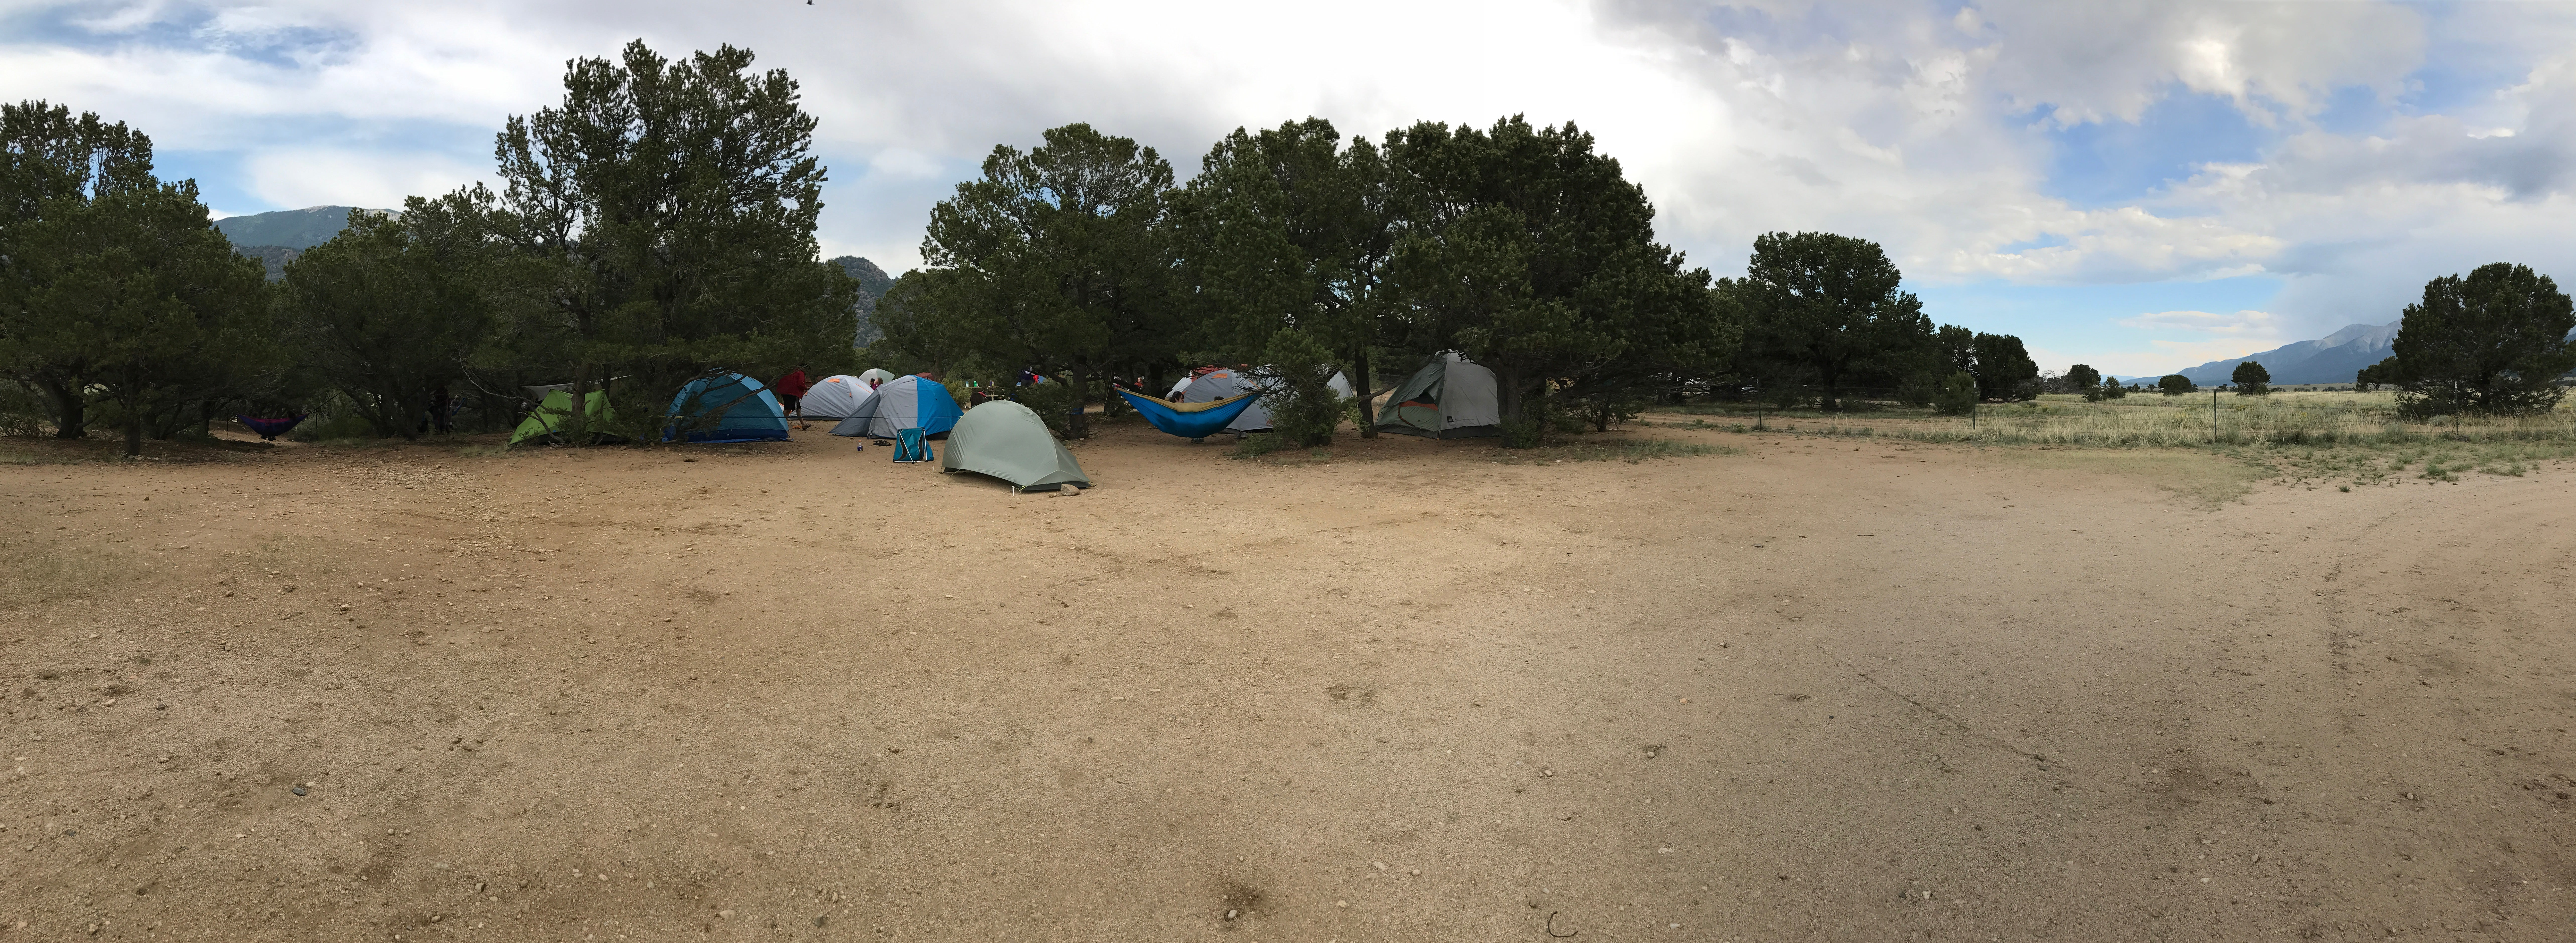 Look at all those tents. 